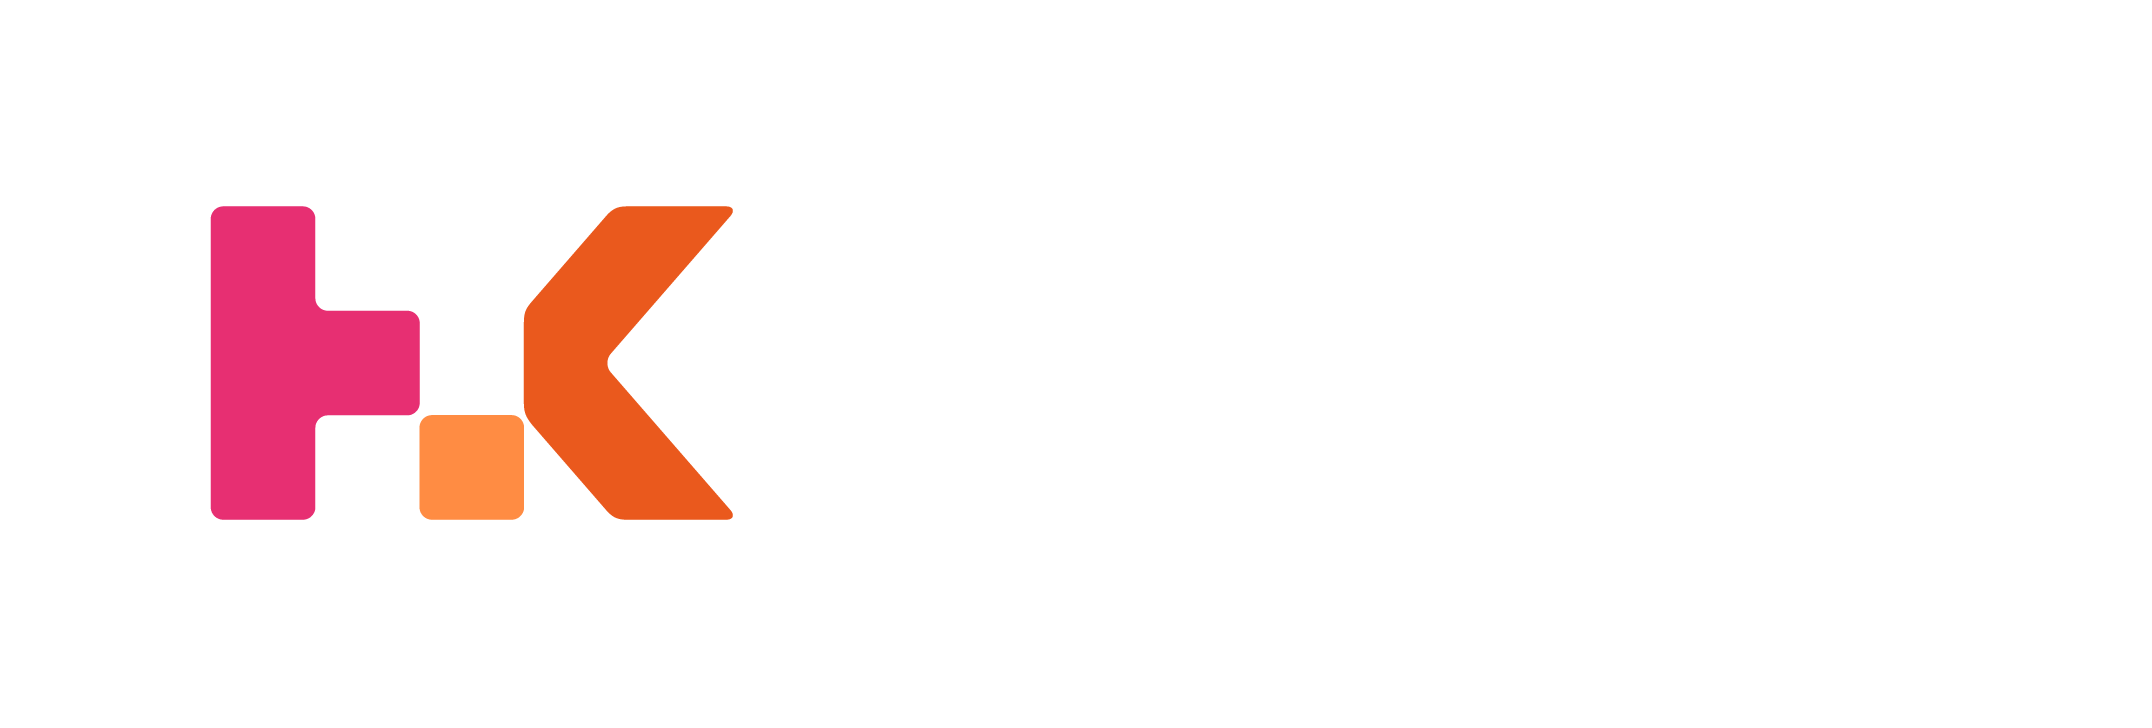 Logo for the Directorate for Higher Education and Skills